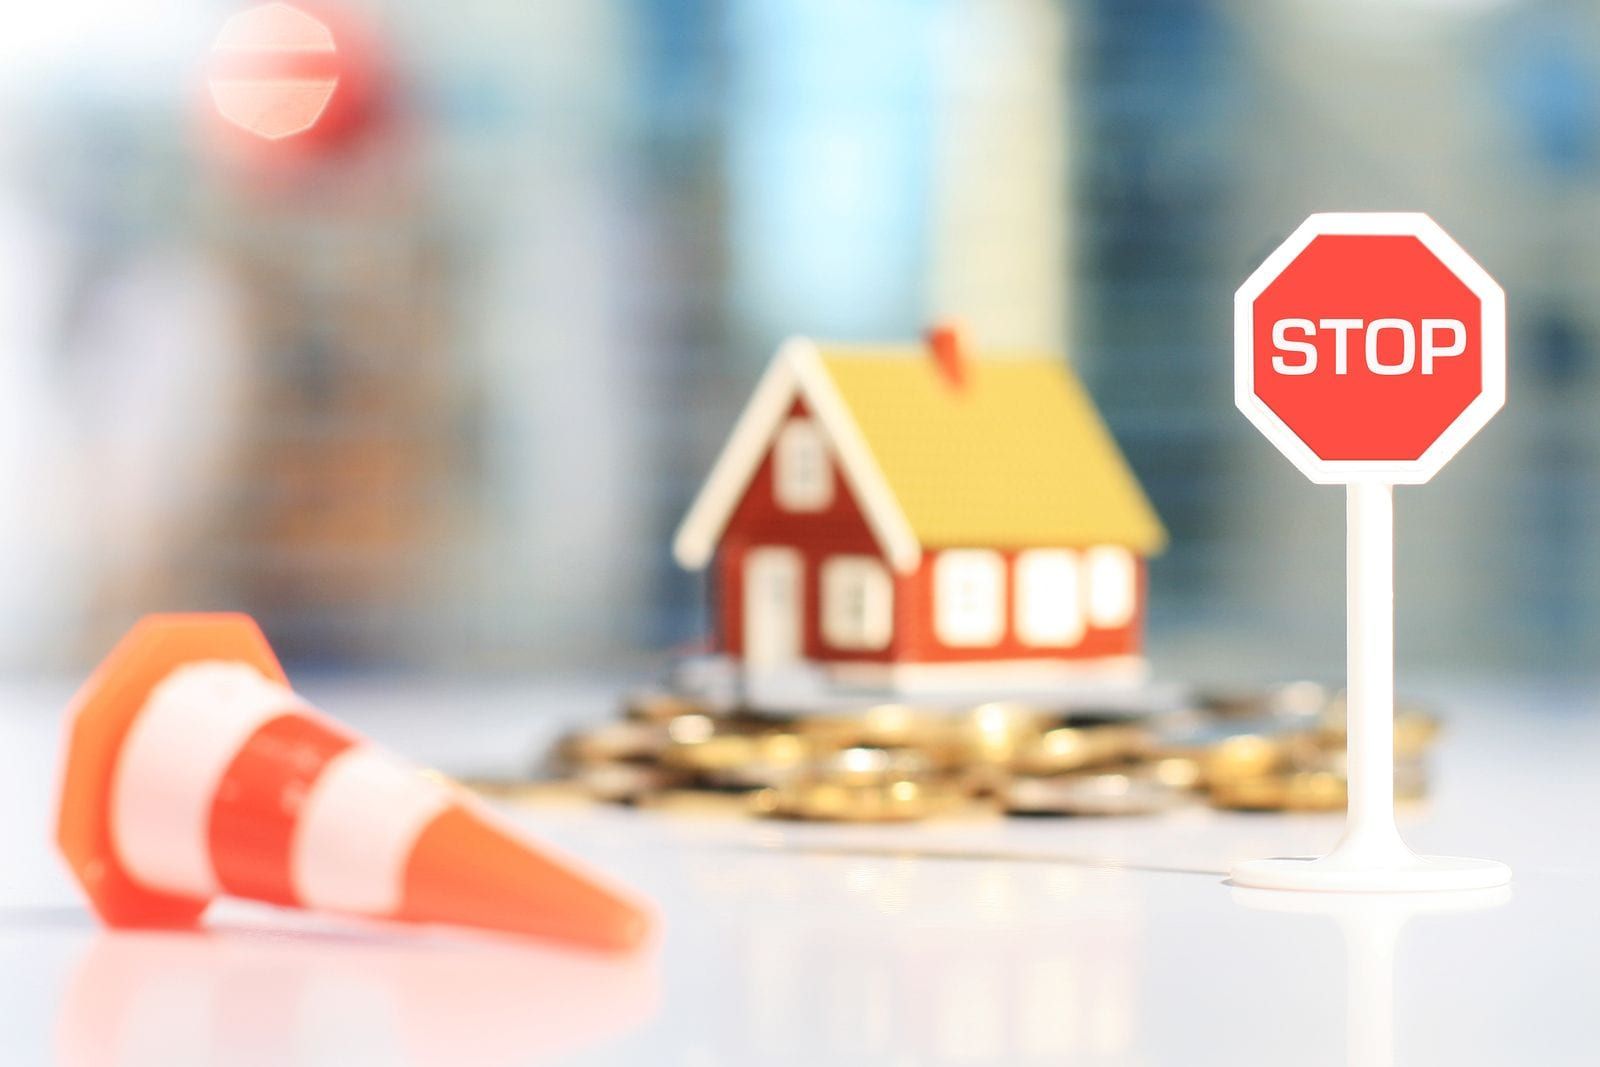 Red Flags Every Homebuyer Should Look Out For